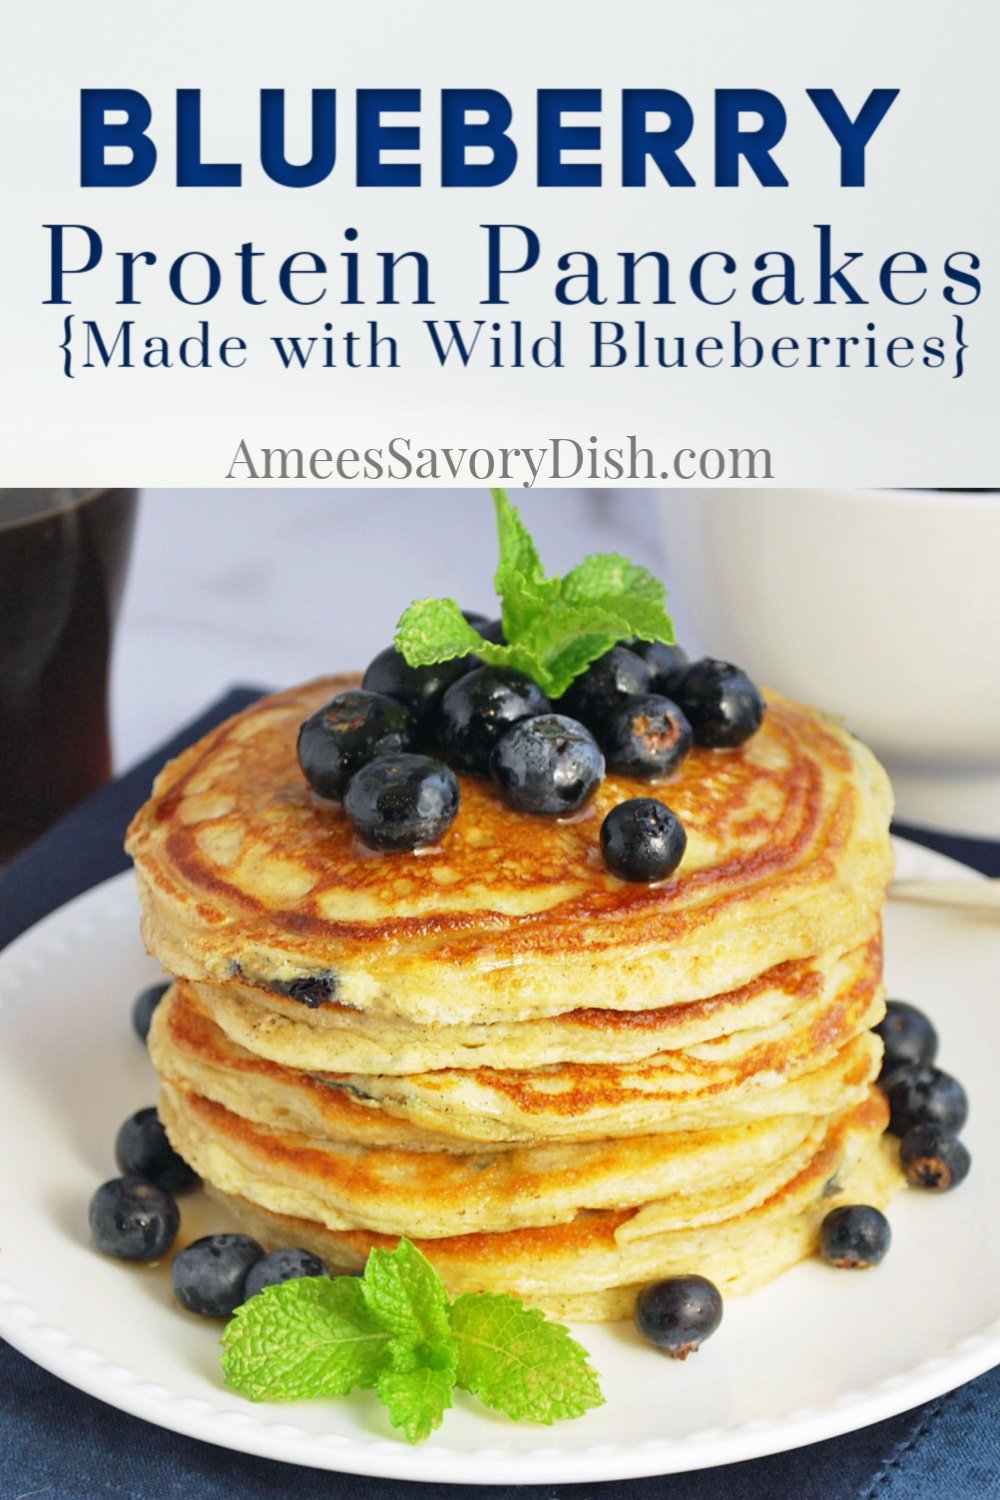 Wild blueberry protein pancakes make for a delicious, healthy breakfast. Protein-packed, buttermilk oat pancakes, bursting with wild blueberries. An easy breakfast recipe, too! #proteinpancakes #blueberrypancakes #wildblueberries #pancakerecipe via @Ameessavorydish